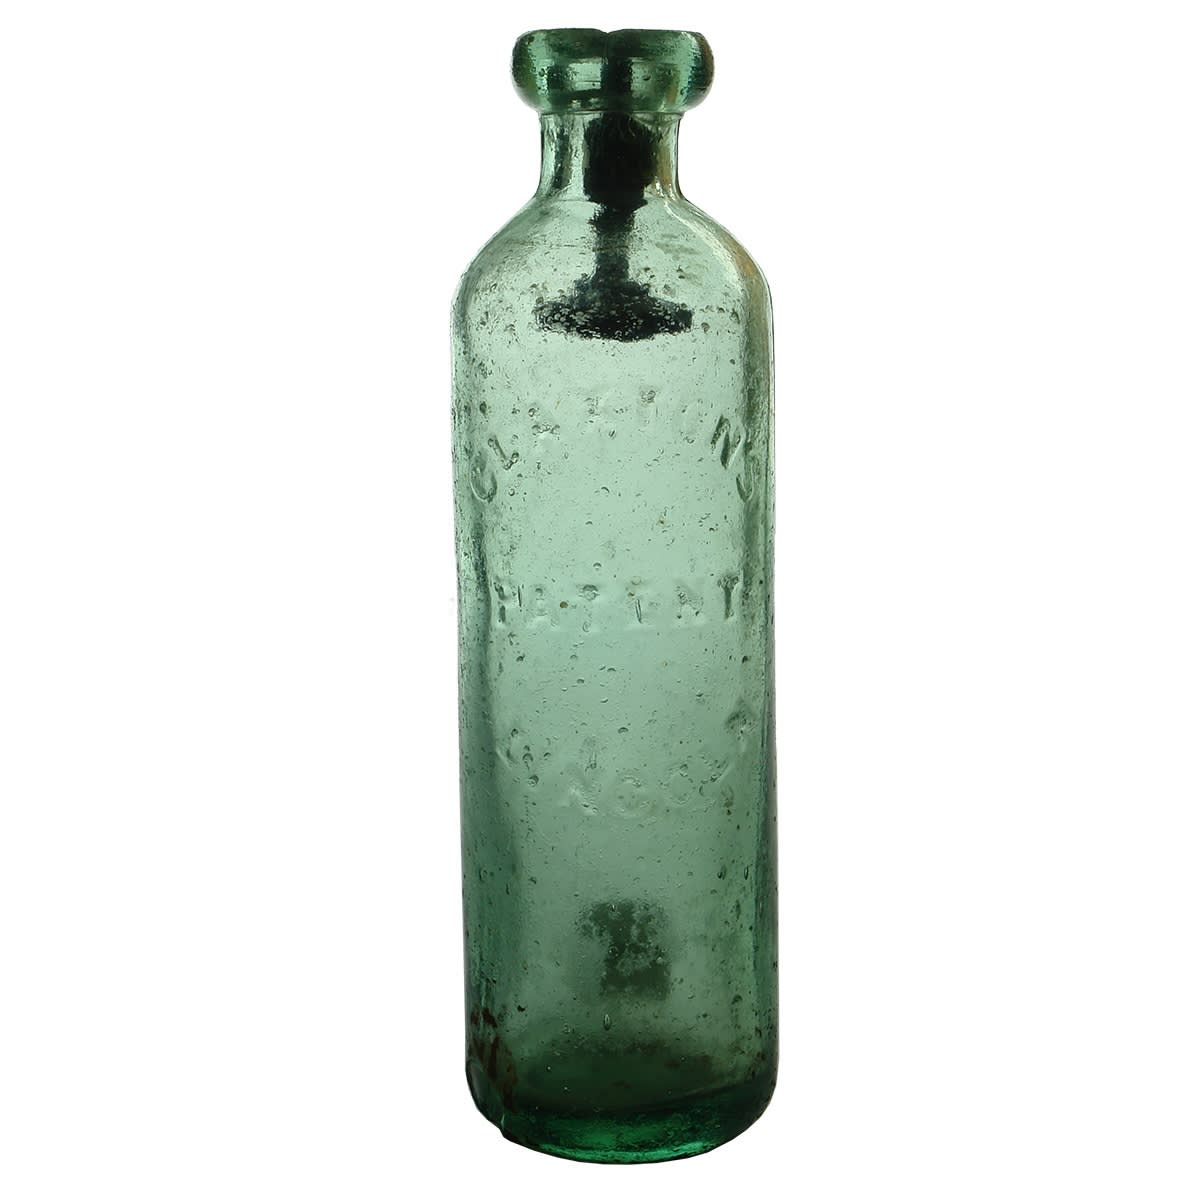 Patent Aerated Water. Claxton's Patent Lincoln. Aqua. 10 oz. With metal & rubber stopper.